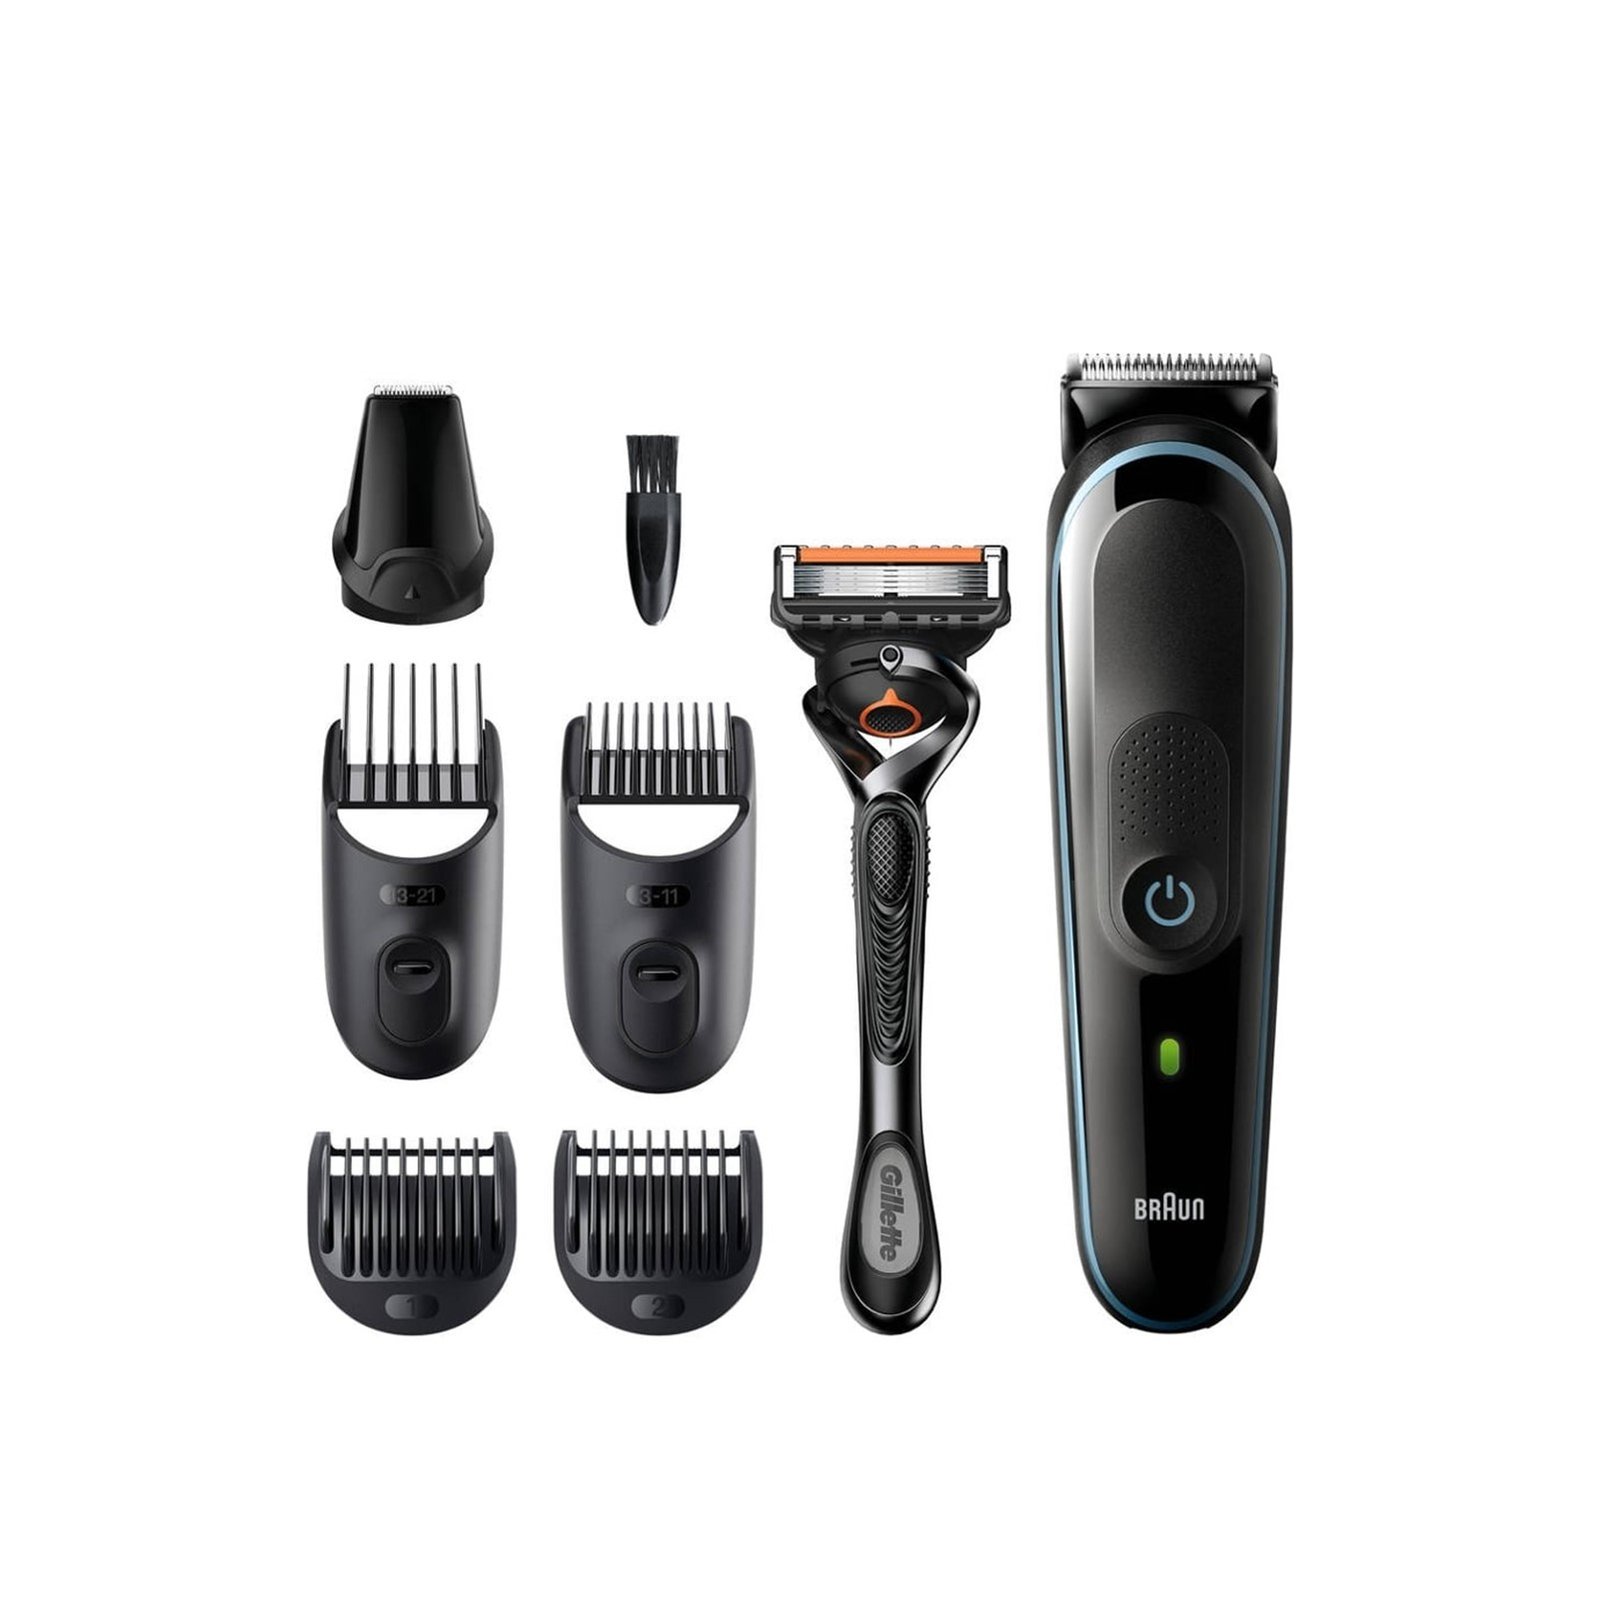 Kit Braun Trimmer Buy MGK3345 3 All-In-One Styling USA ·